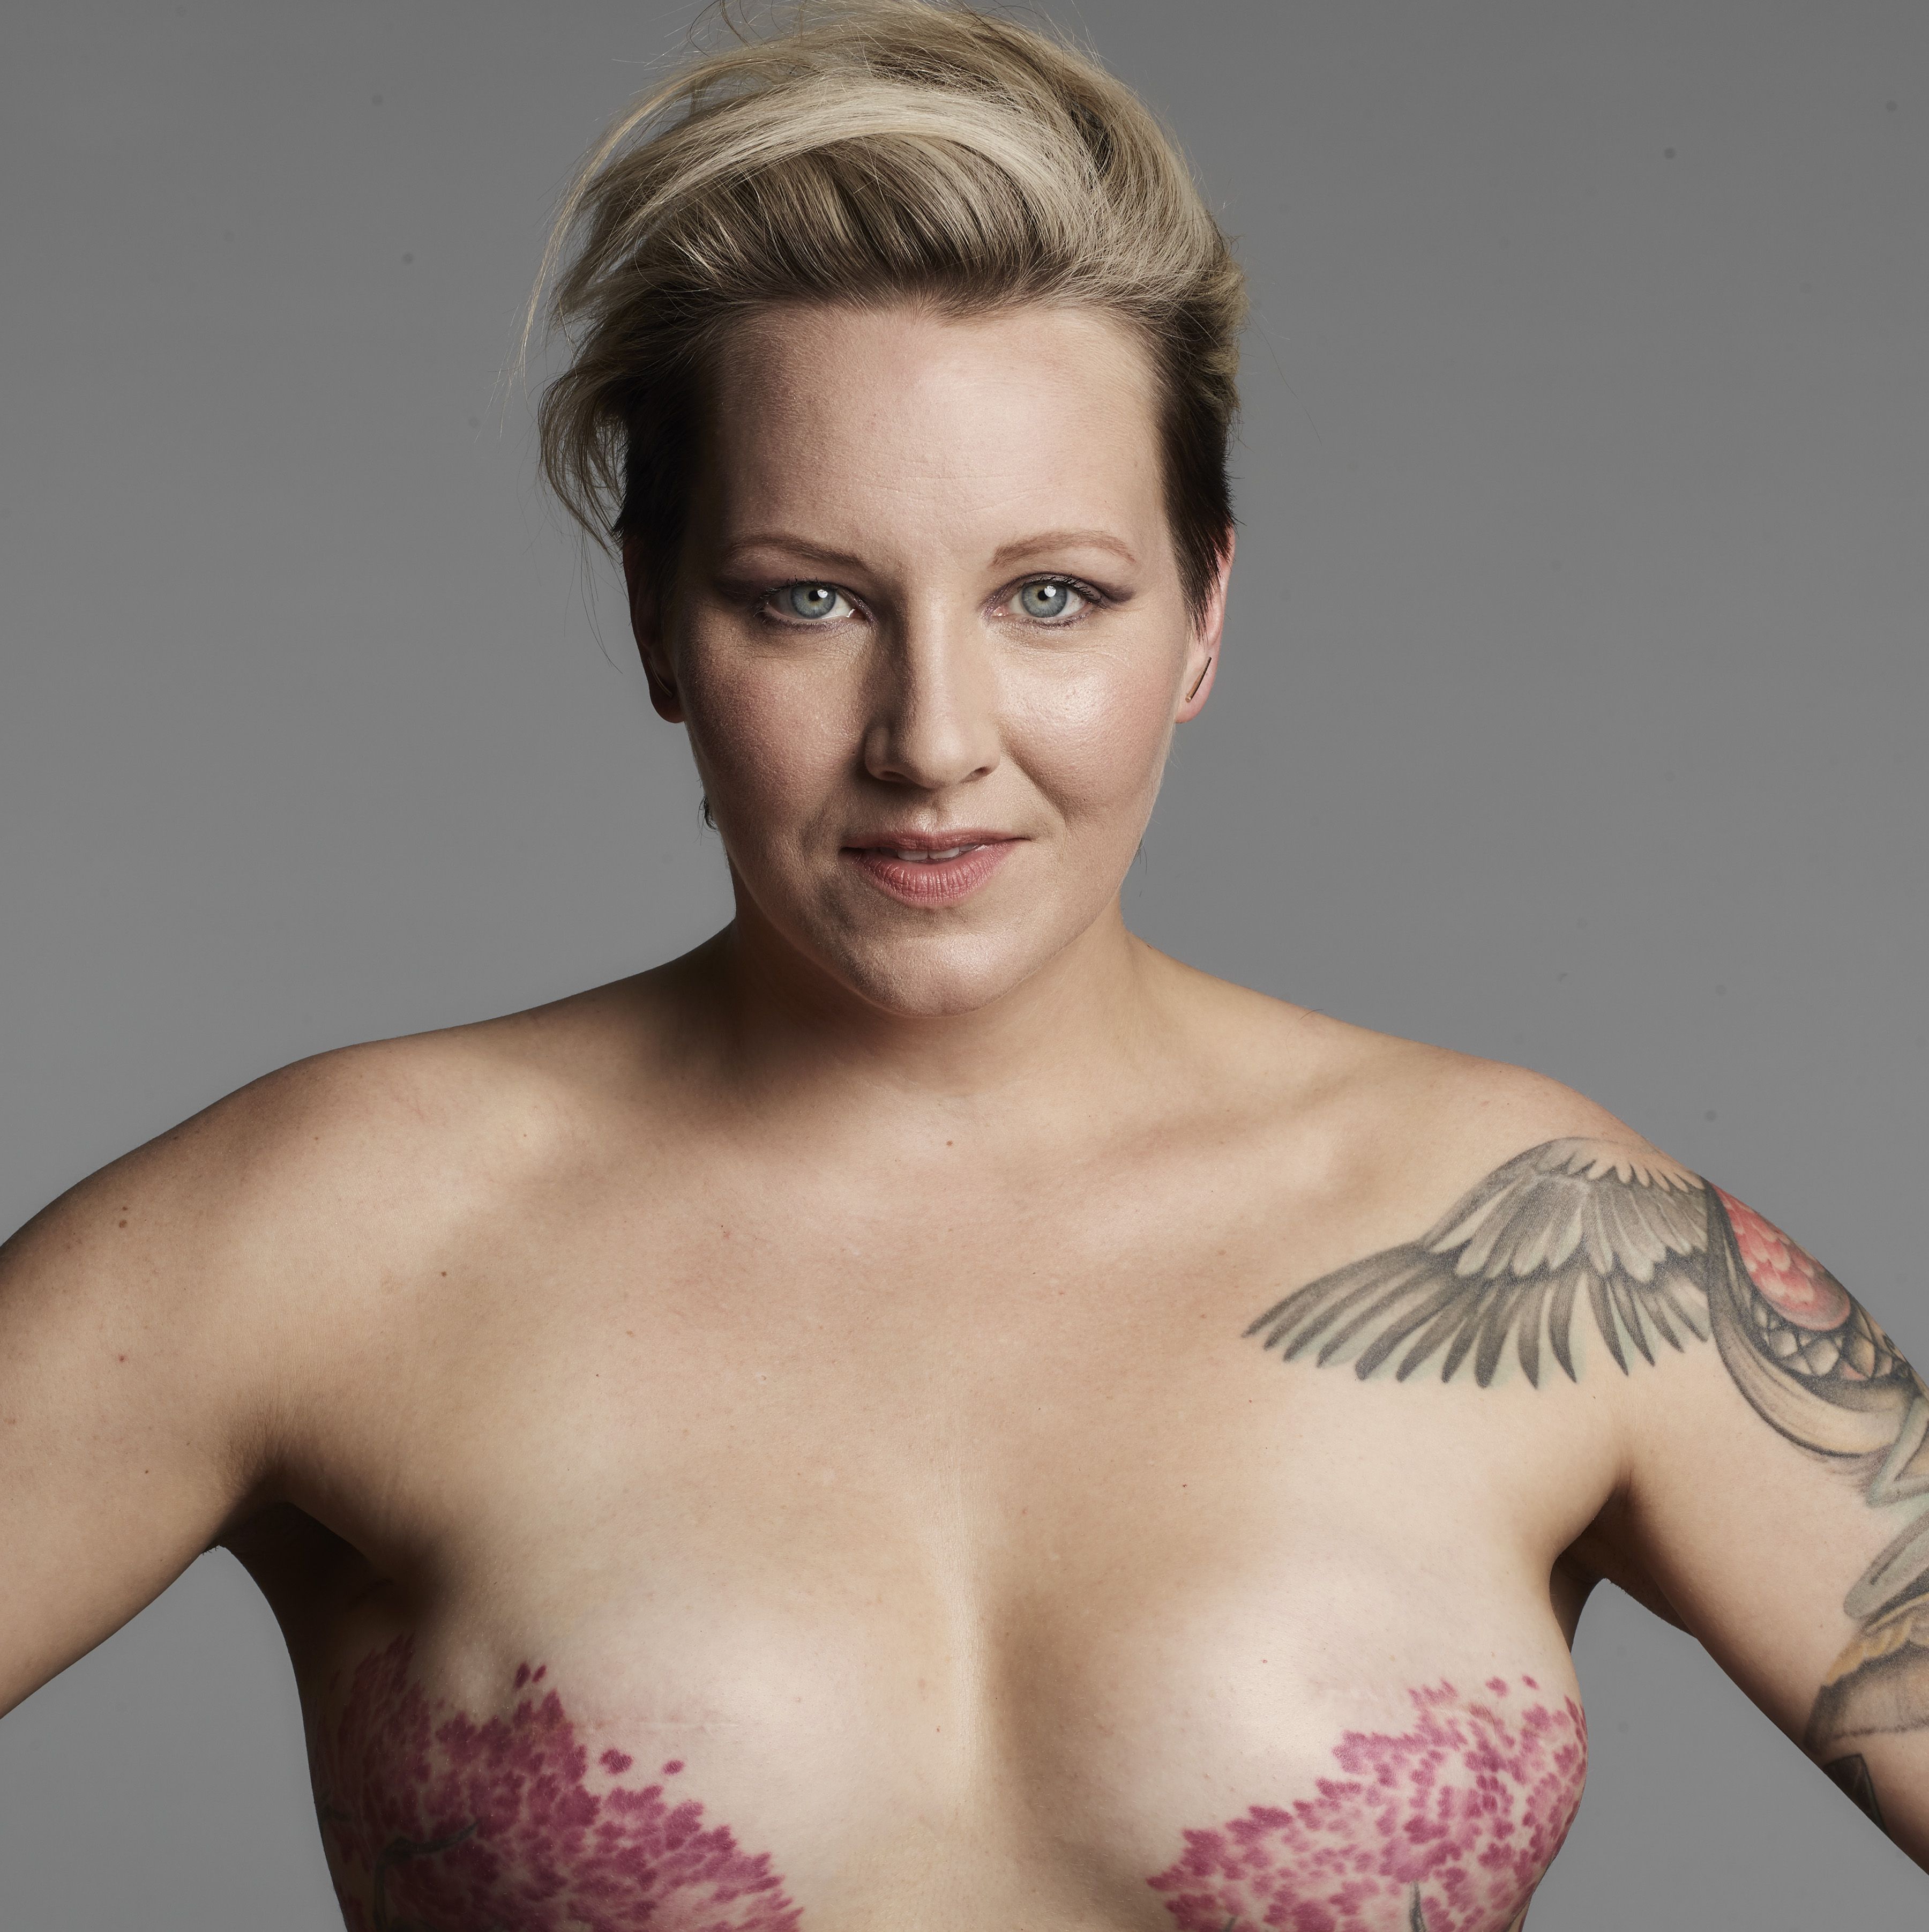 breast cancer tattoos on breast